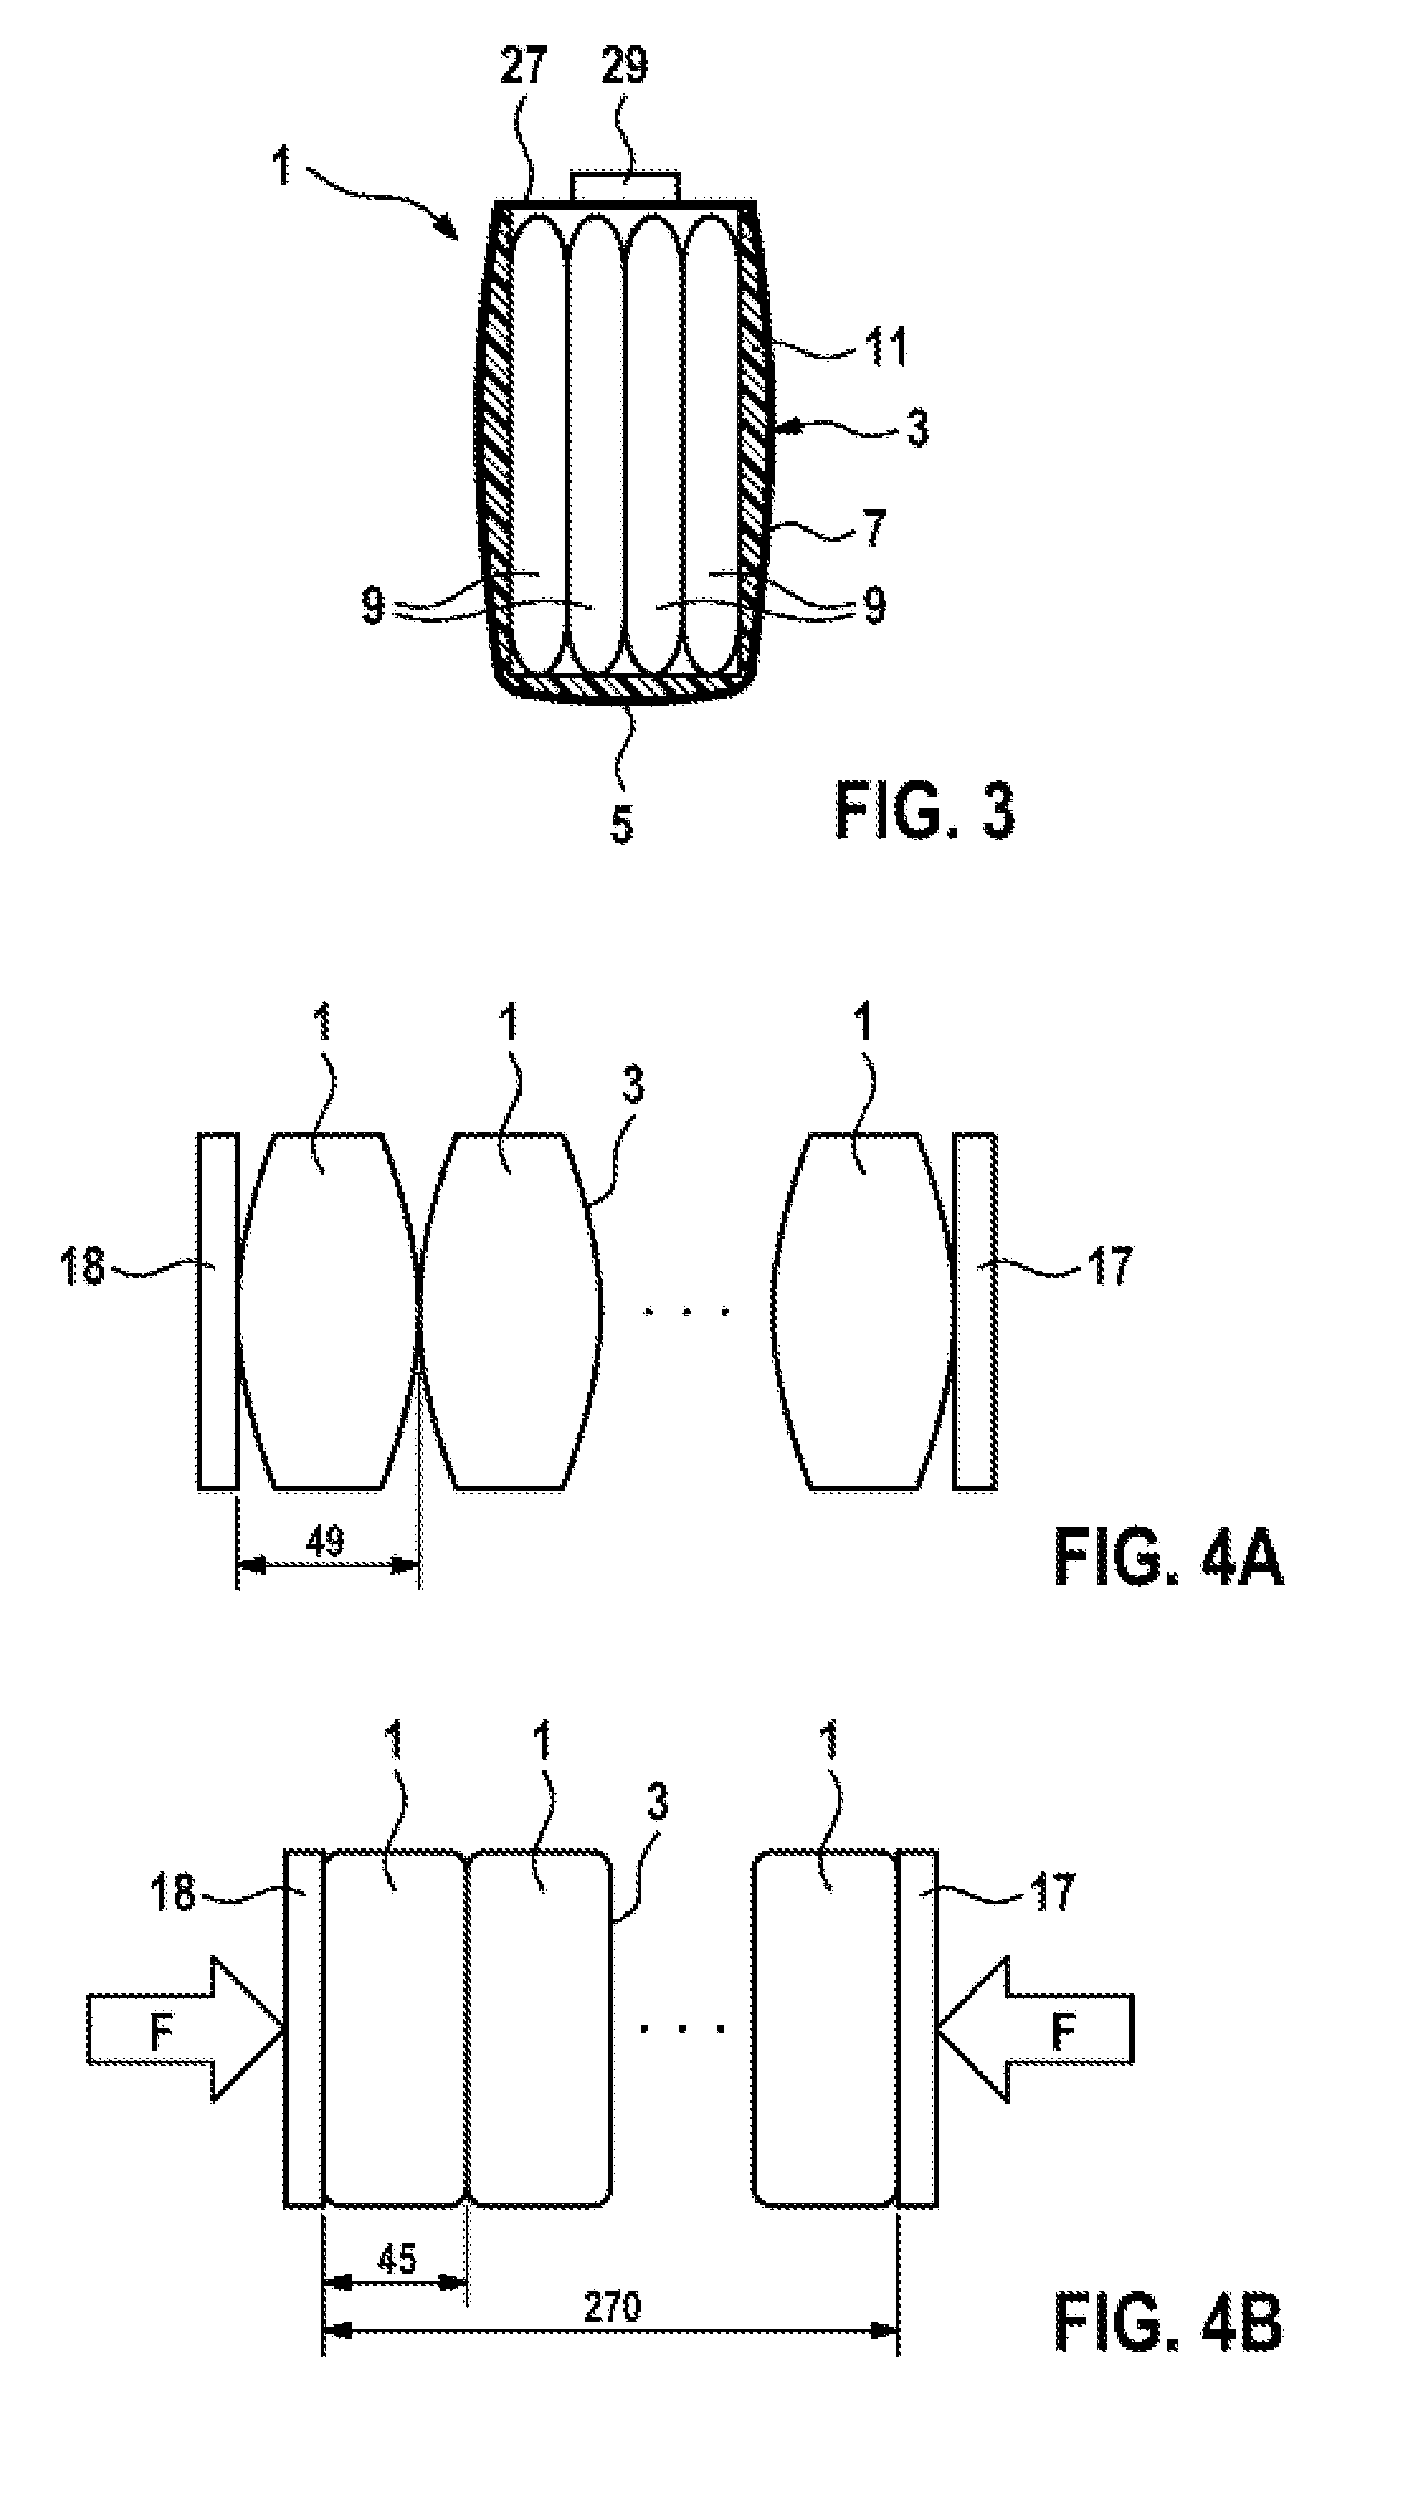 Restraining of battery cells by way of a cambered design of the battery housing